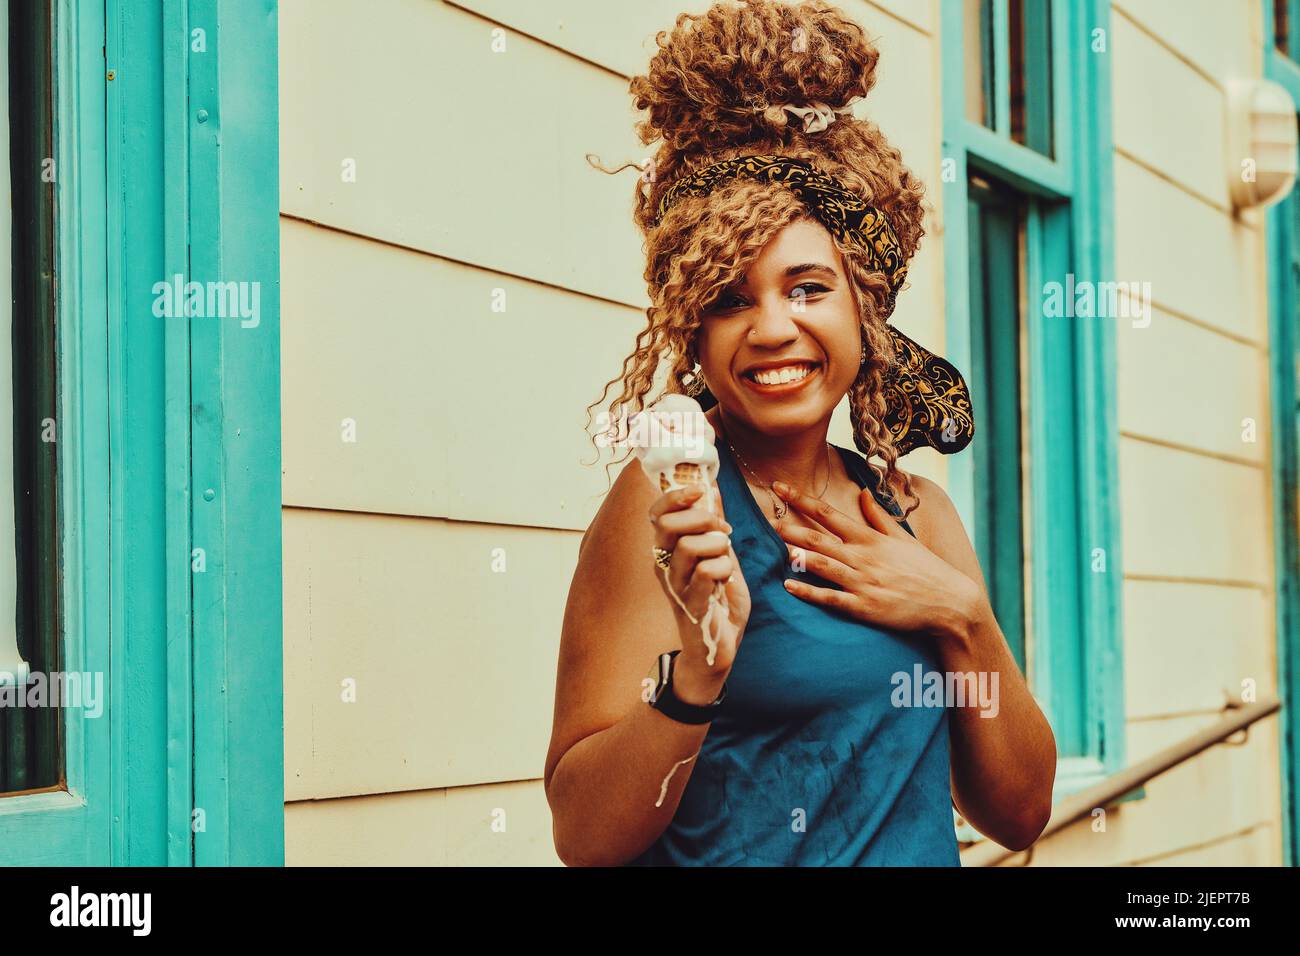 young adult woman afro hair smiling eating ice cream outdoors summertime looking at camera shot Stock Photo